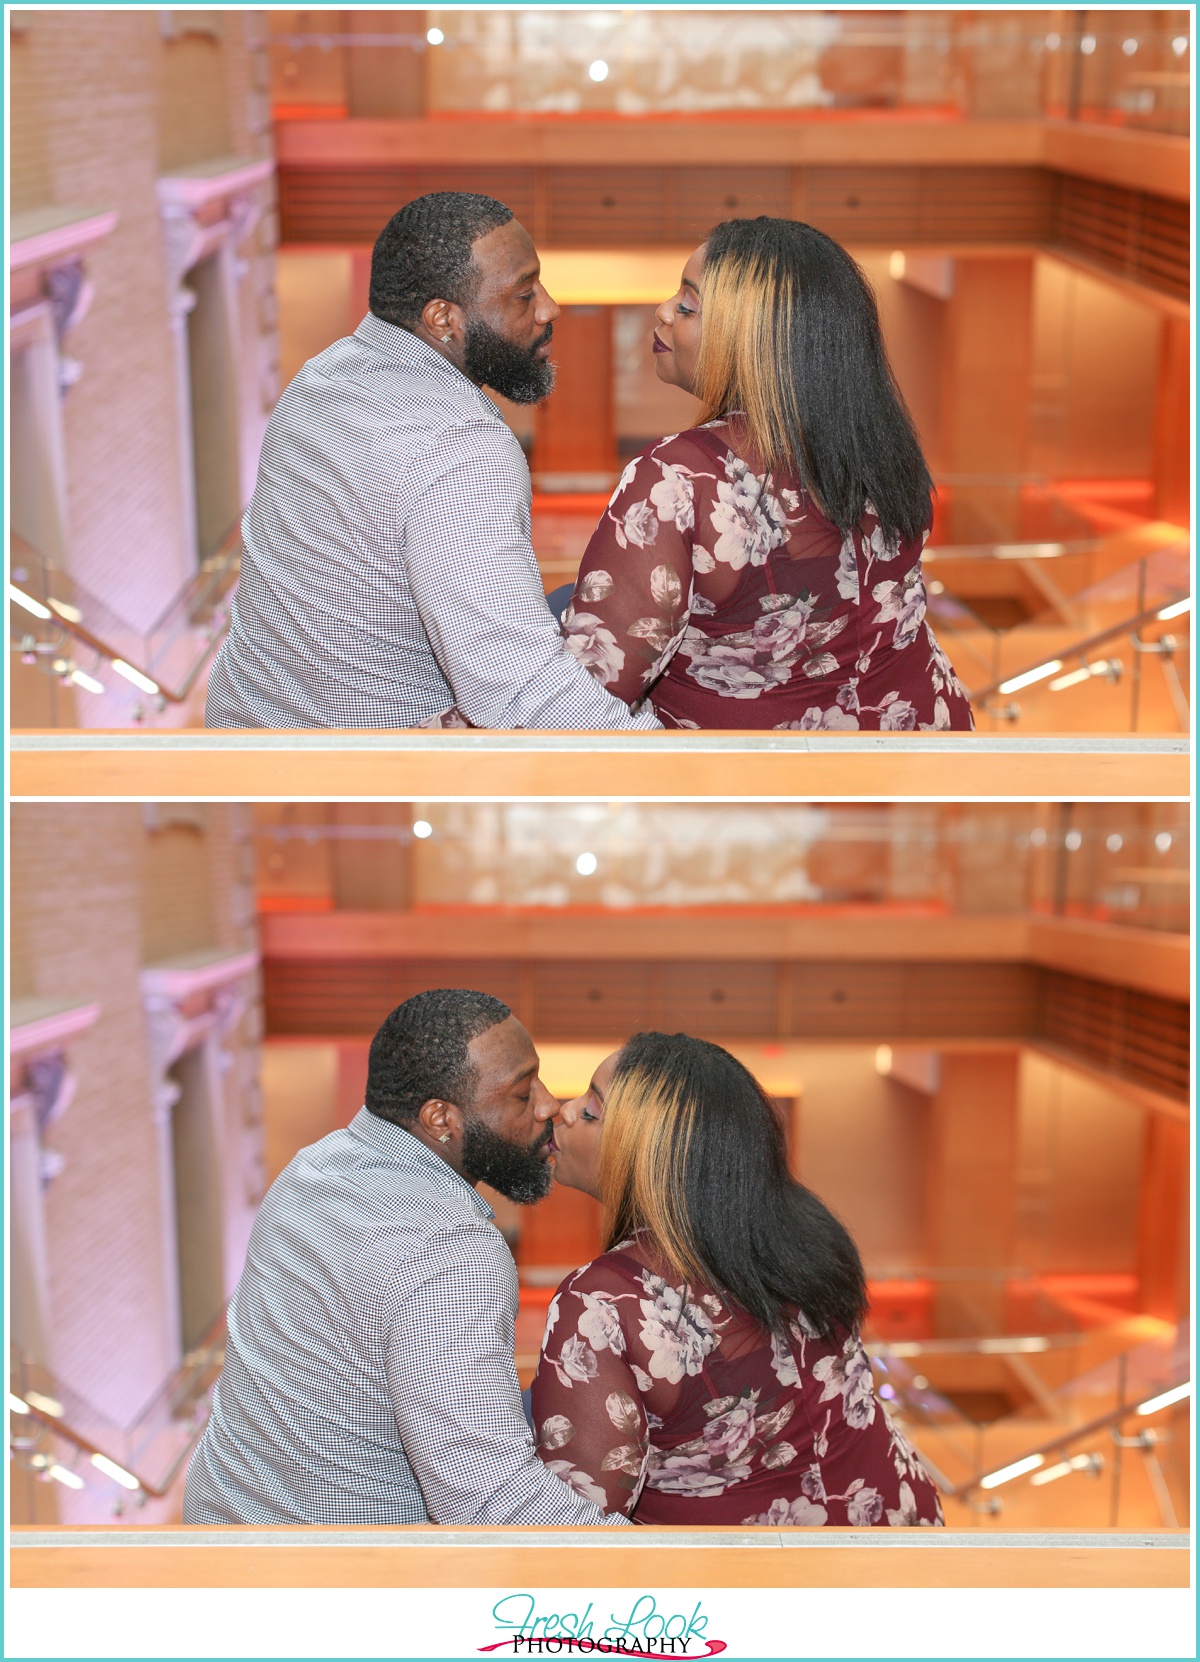 Slover Library Engagement photo shoot